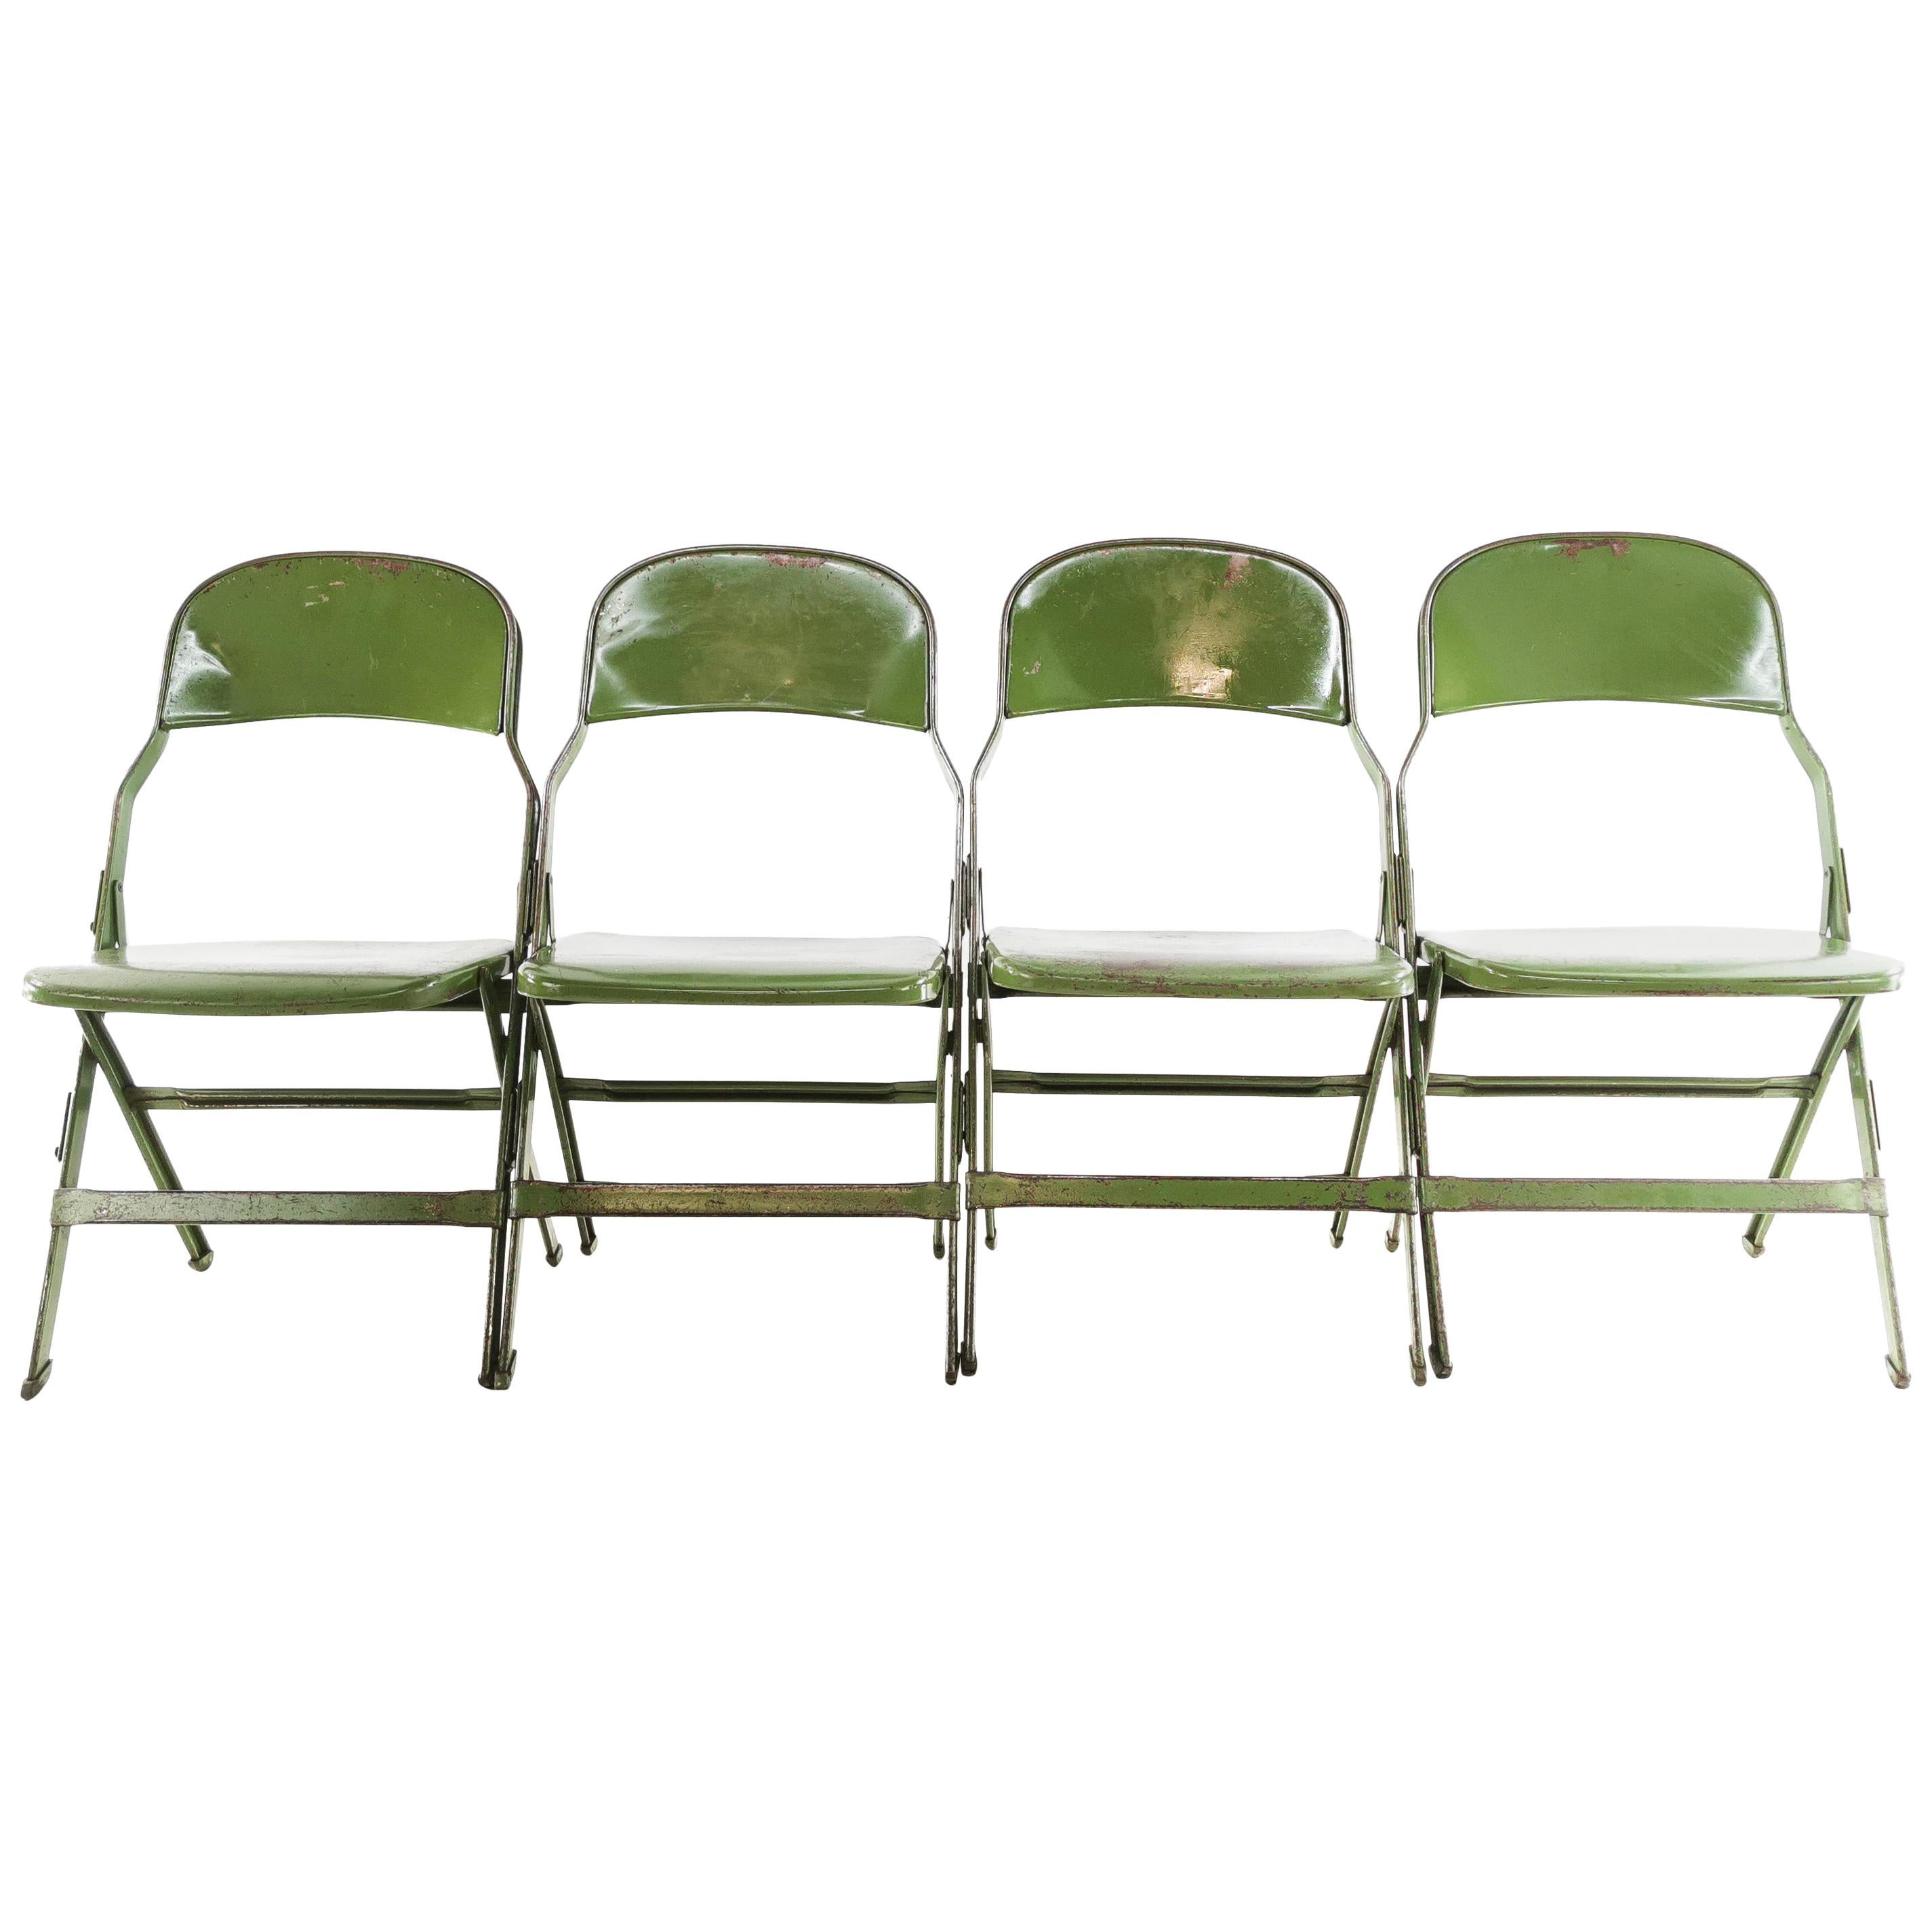 Set of 4 Vintage Clarin Corp Military Army Folding Chairs, Midcentury